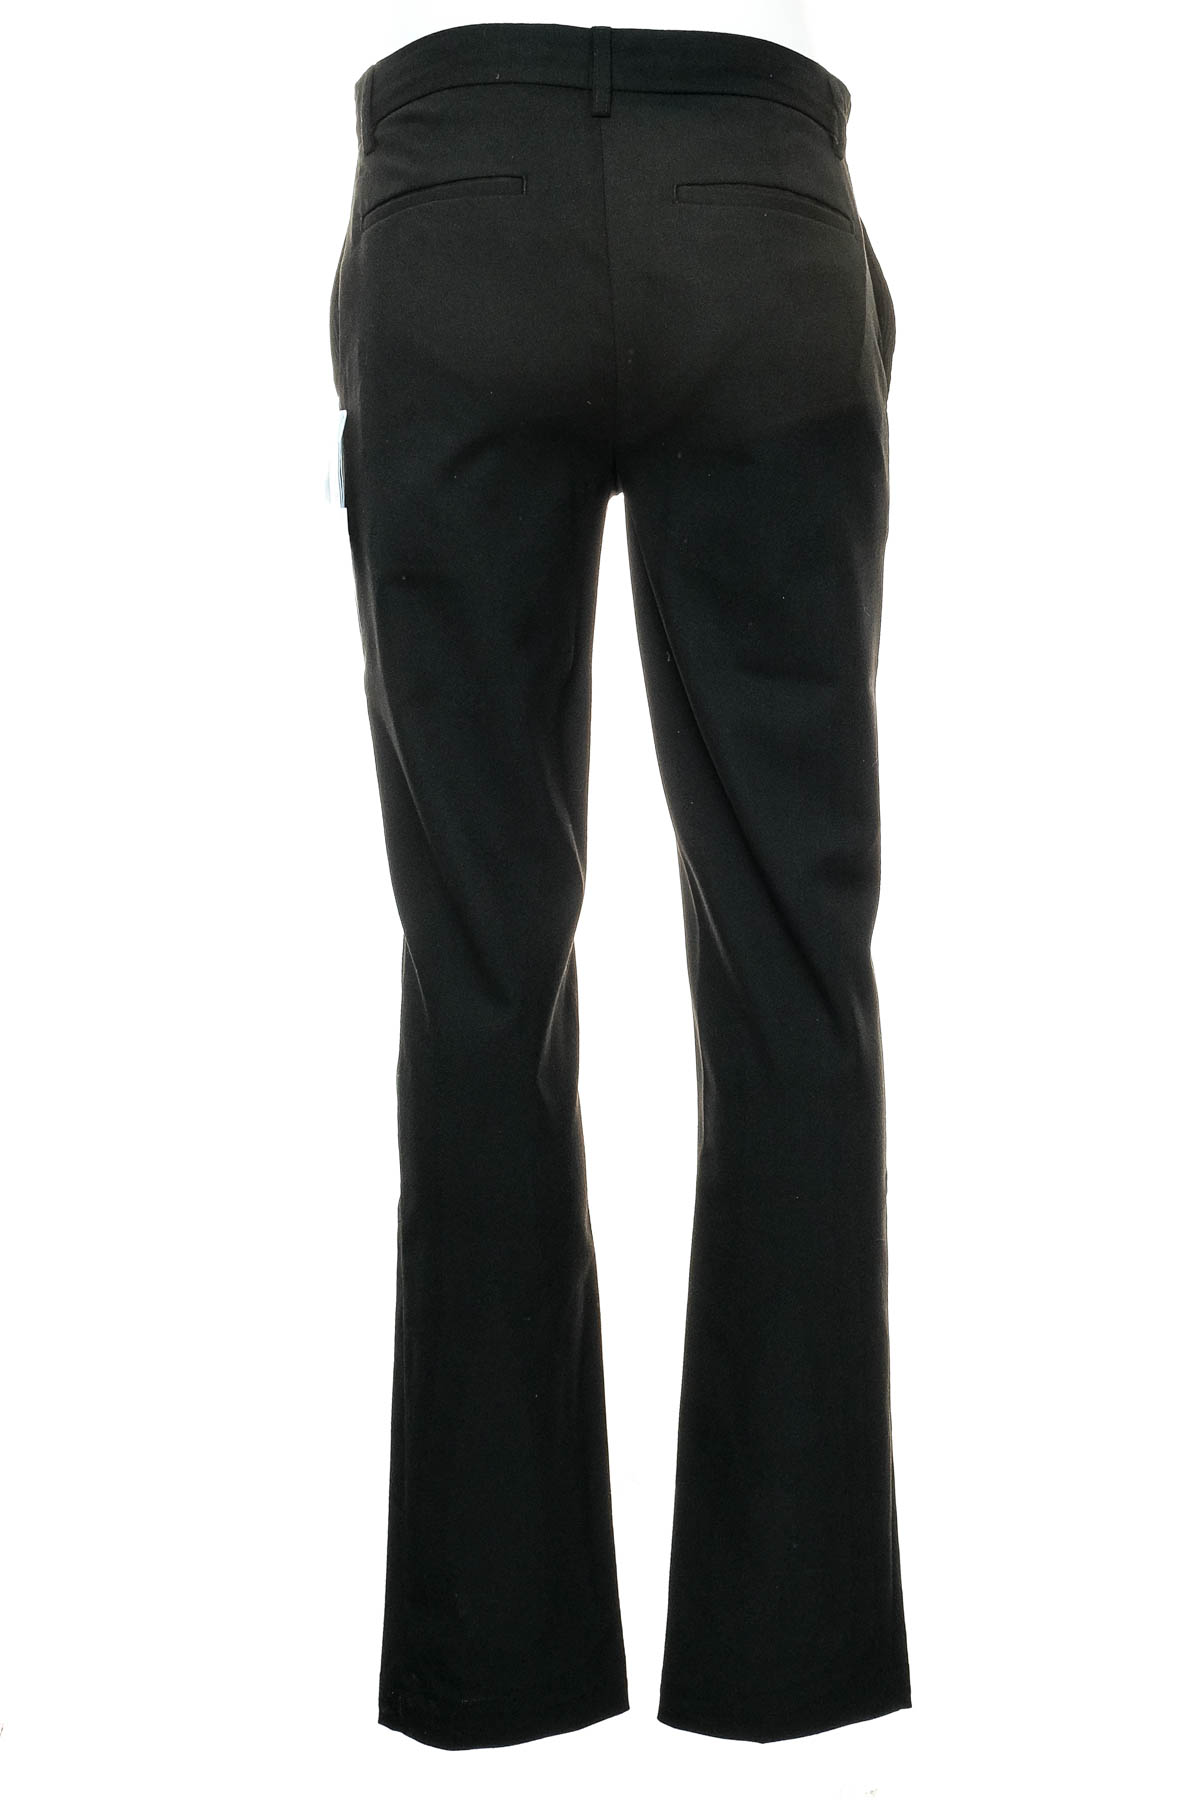 Trousers for boy - M&S - 1